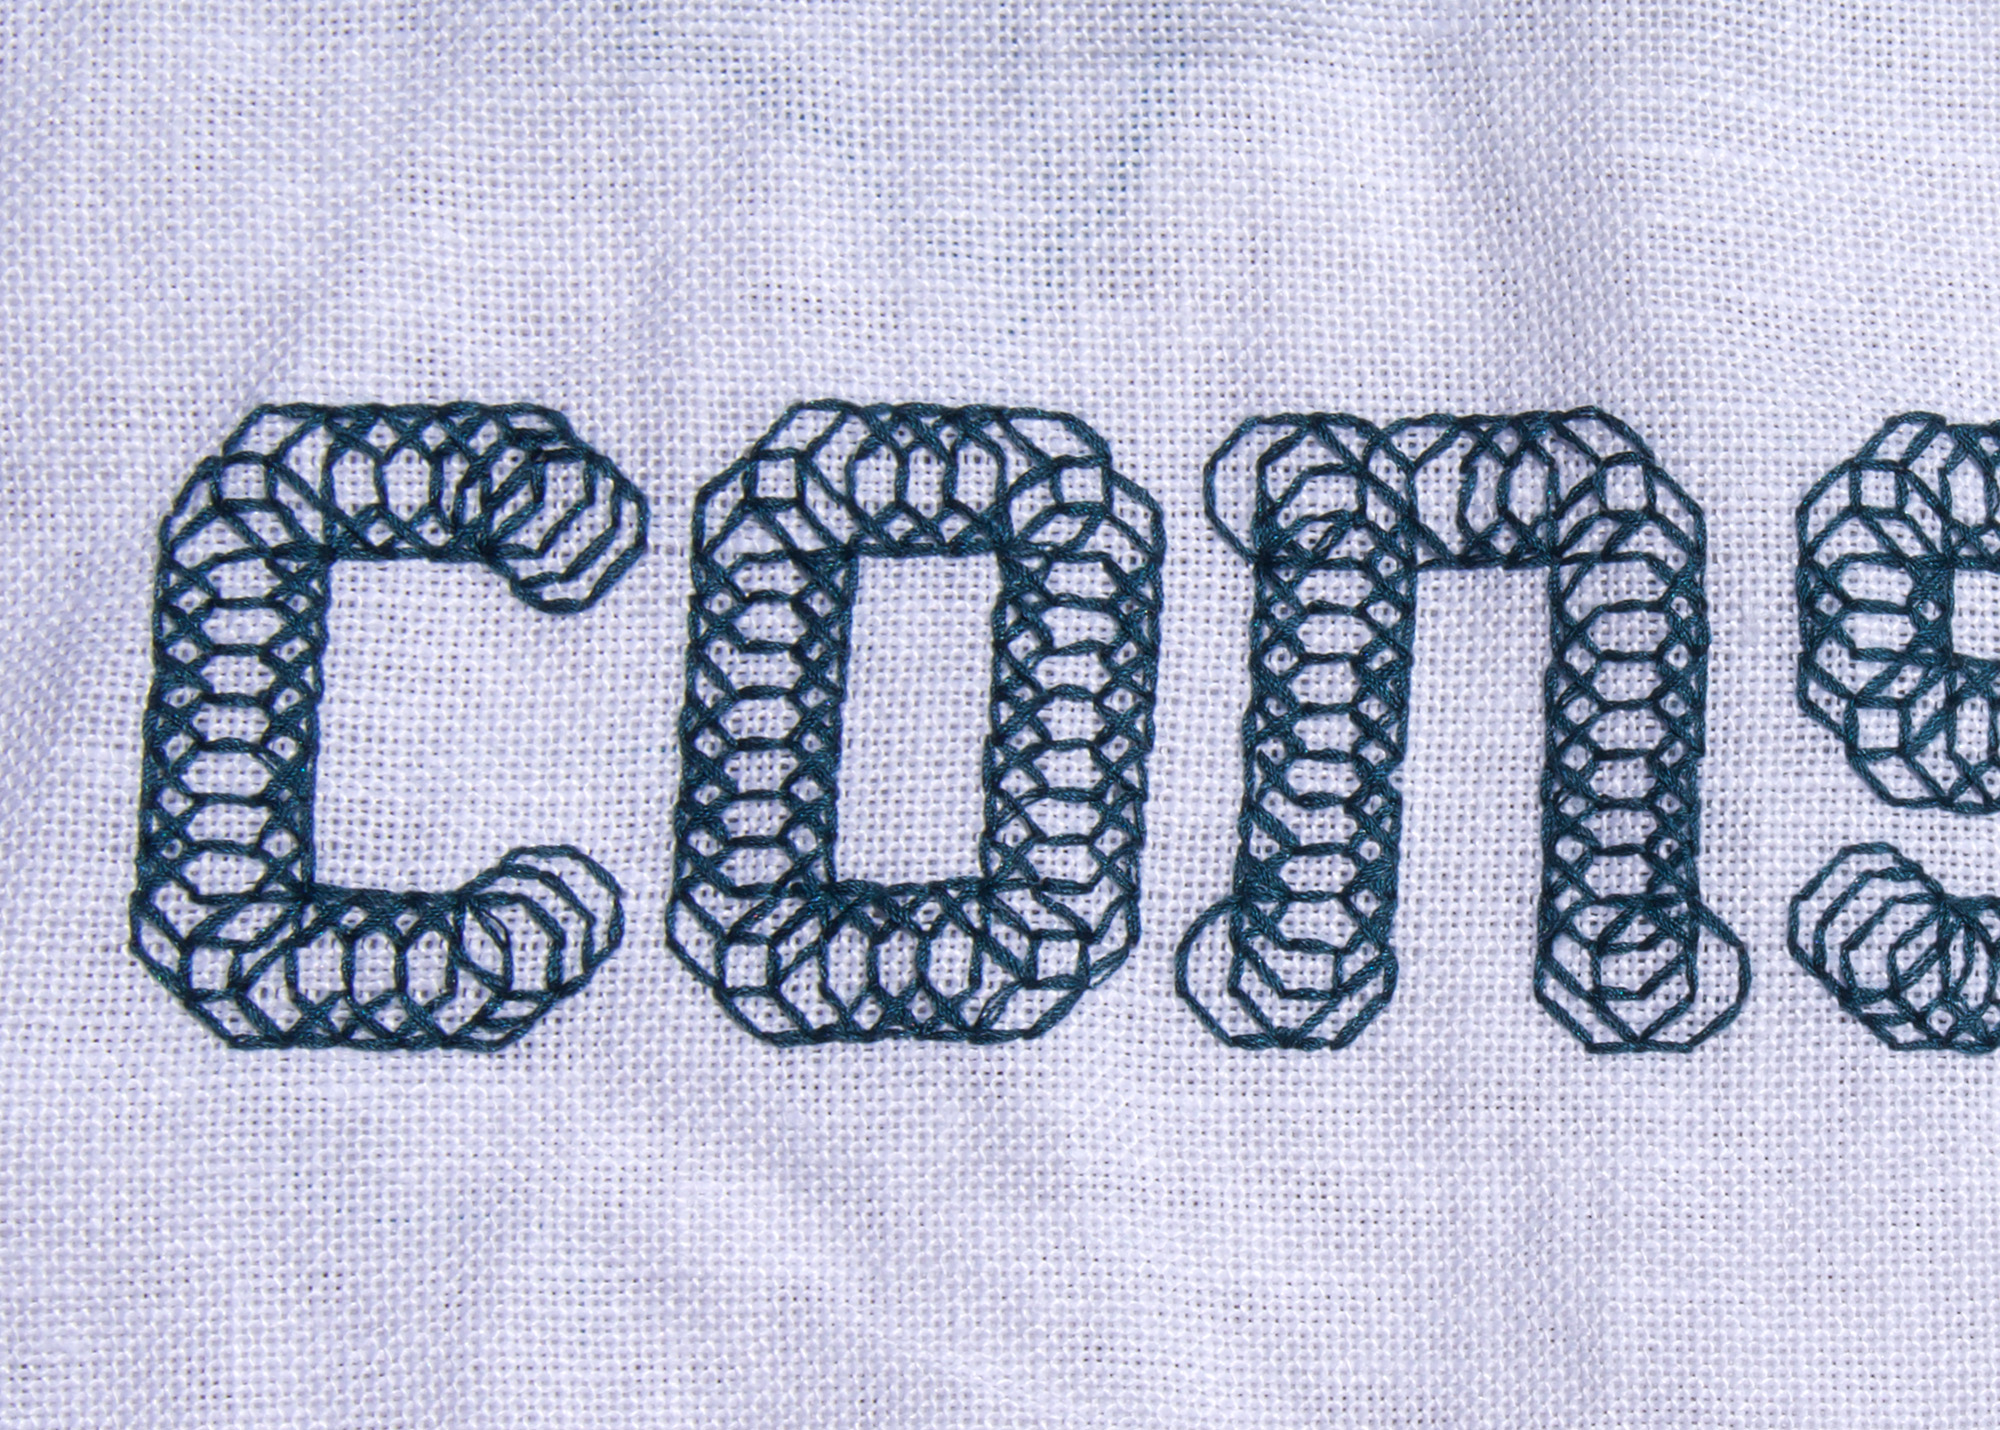 letters con and half of s in green-black silk on white linen cloth